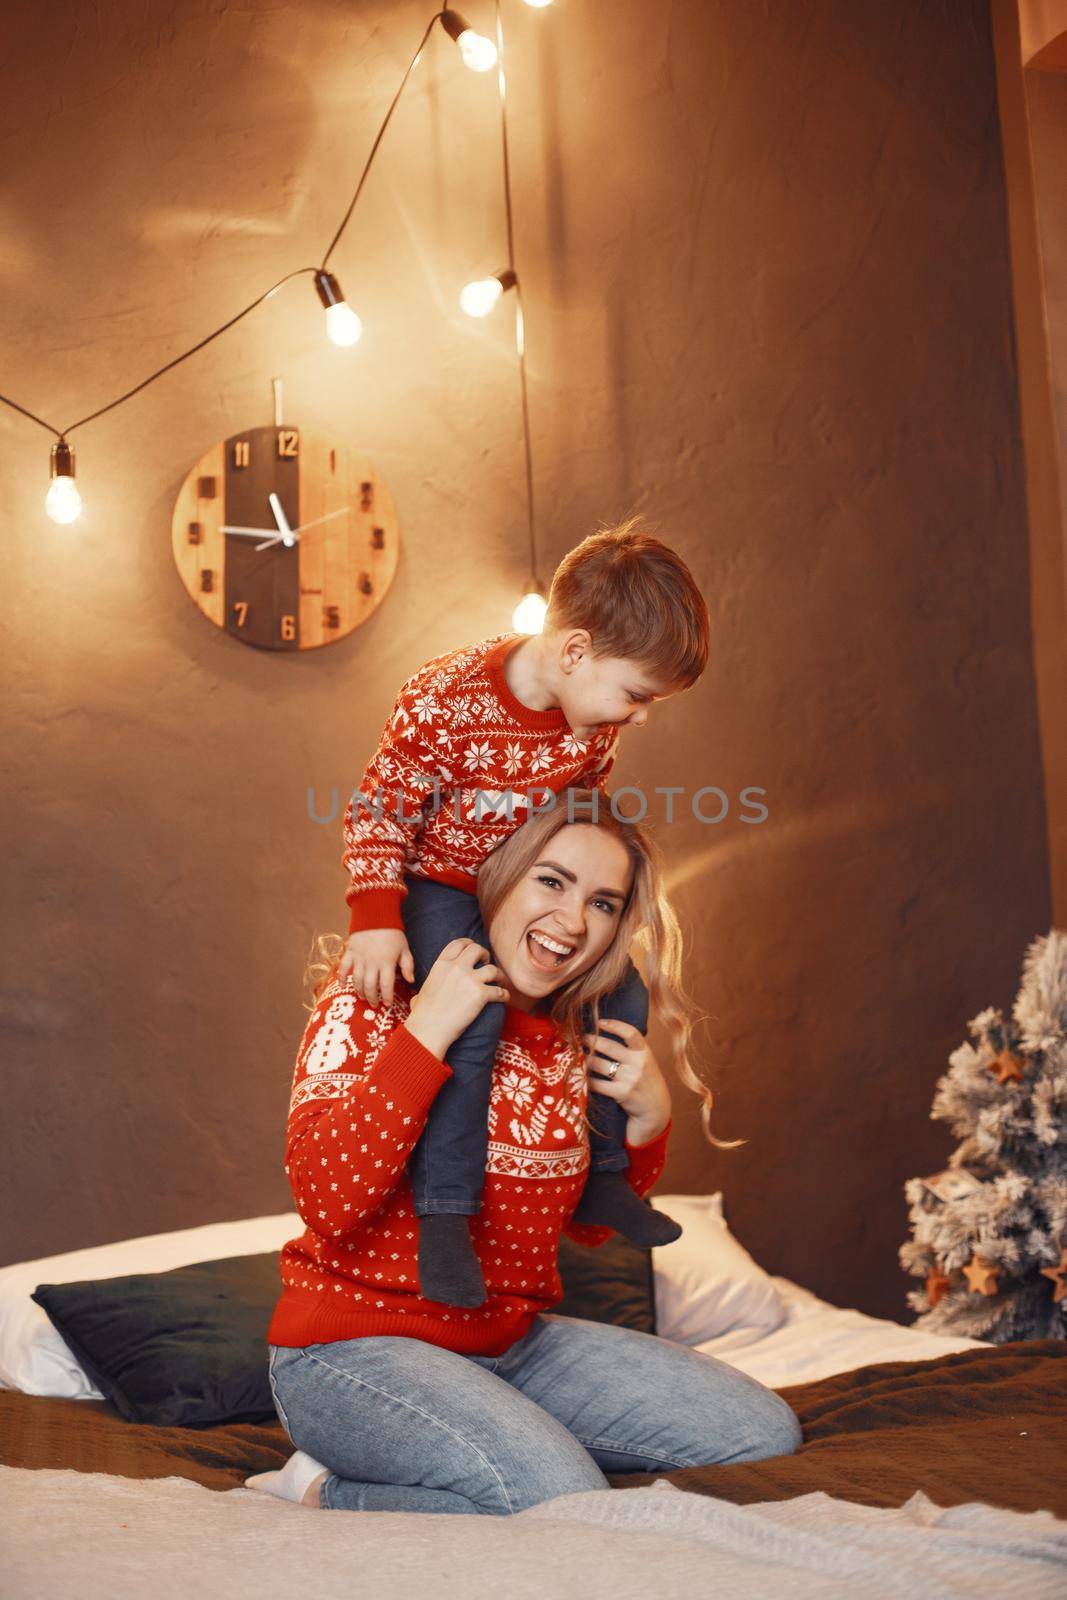 Beautiful mother with child. Family in cristmas atmosphere. Little boy on a bed.